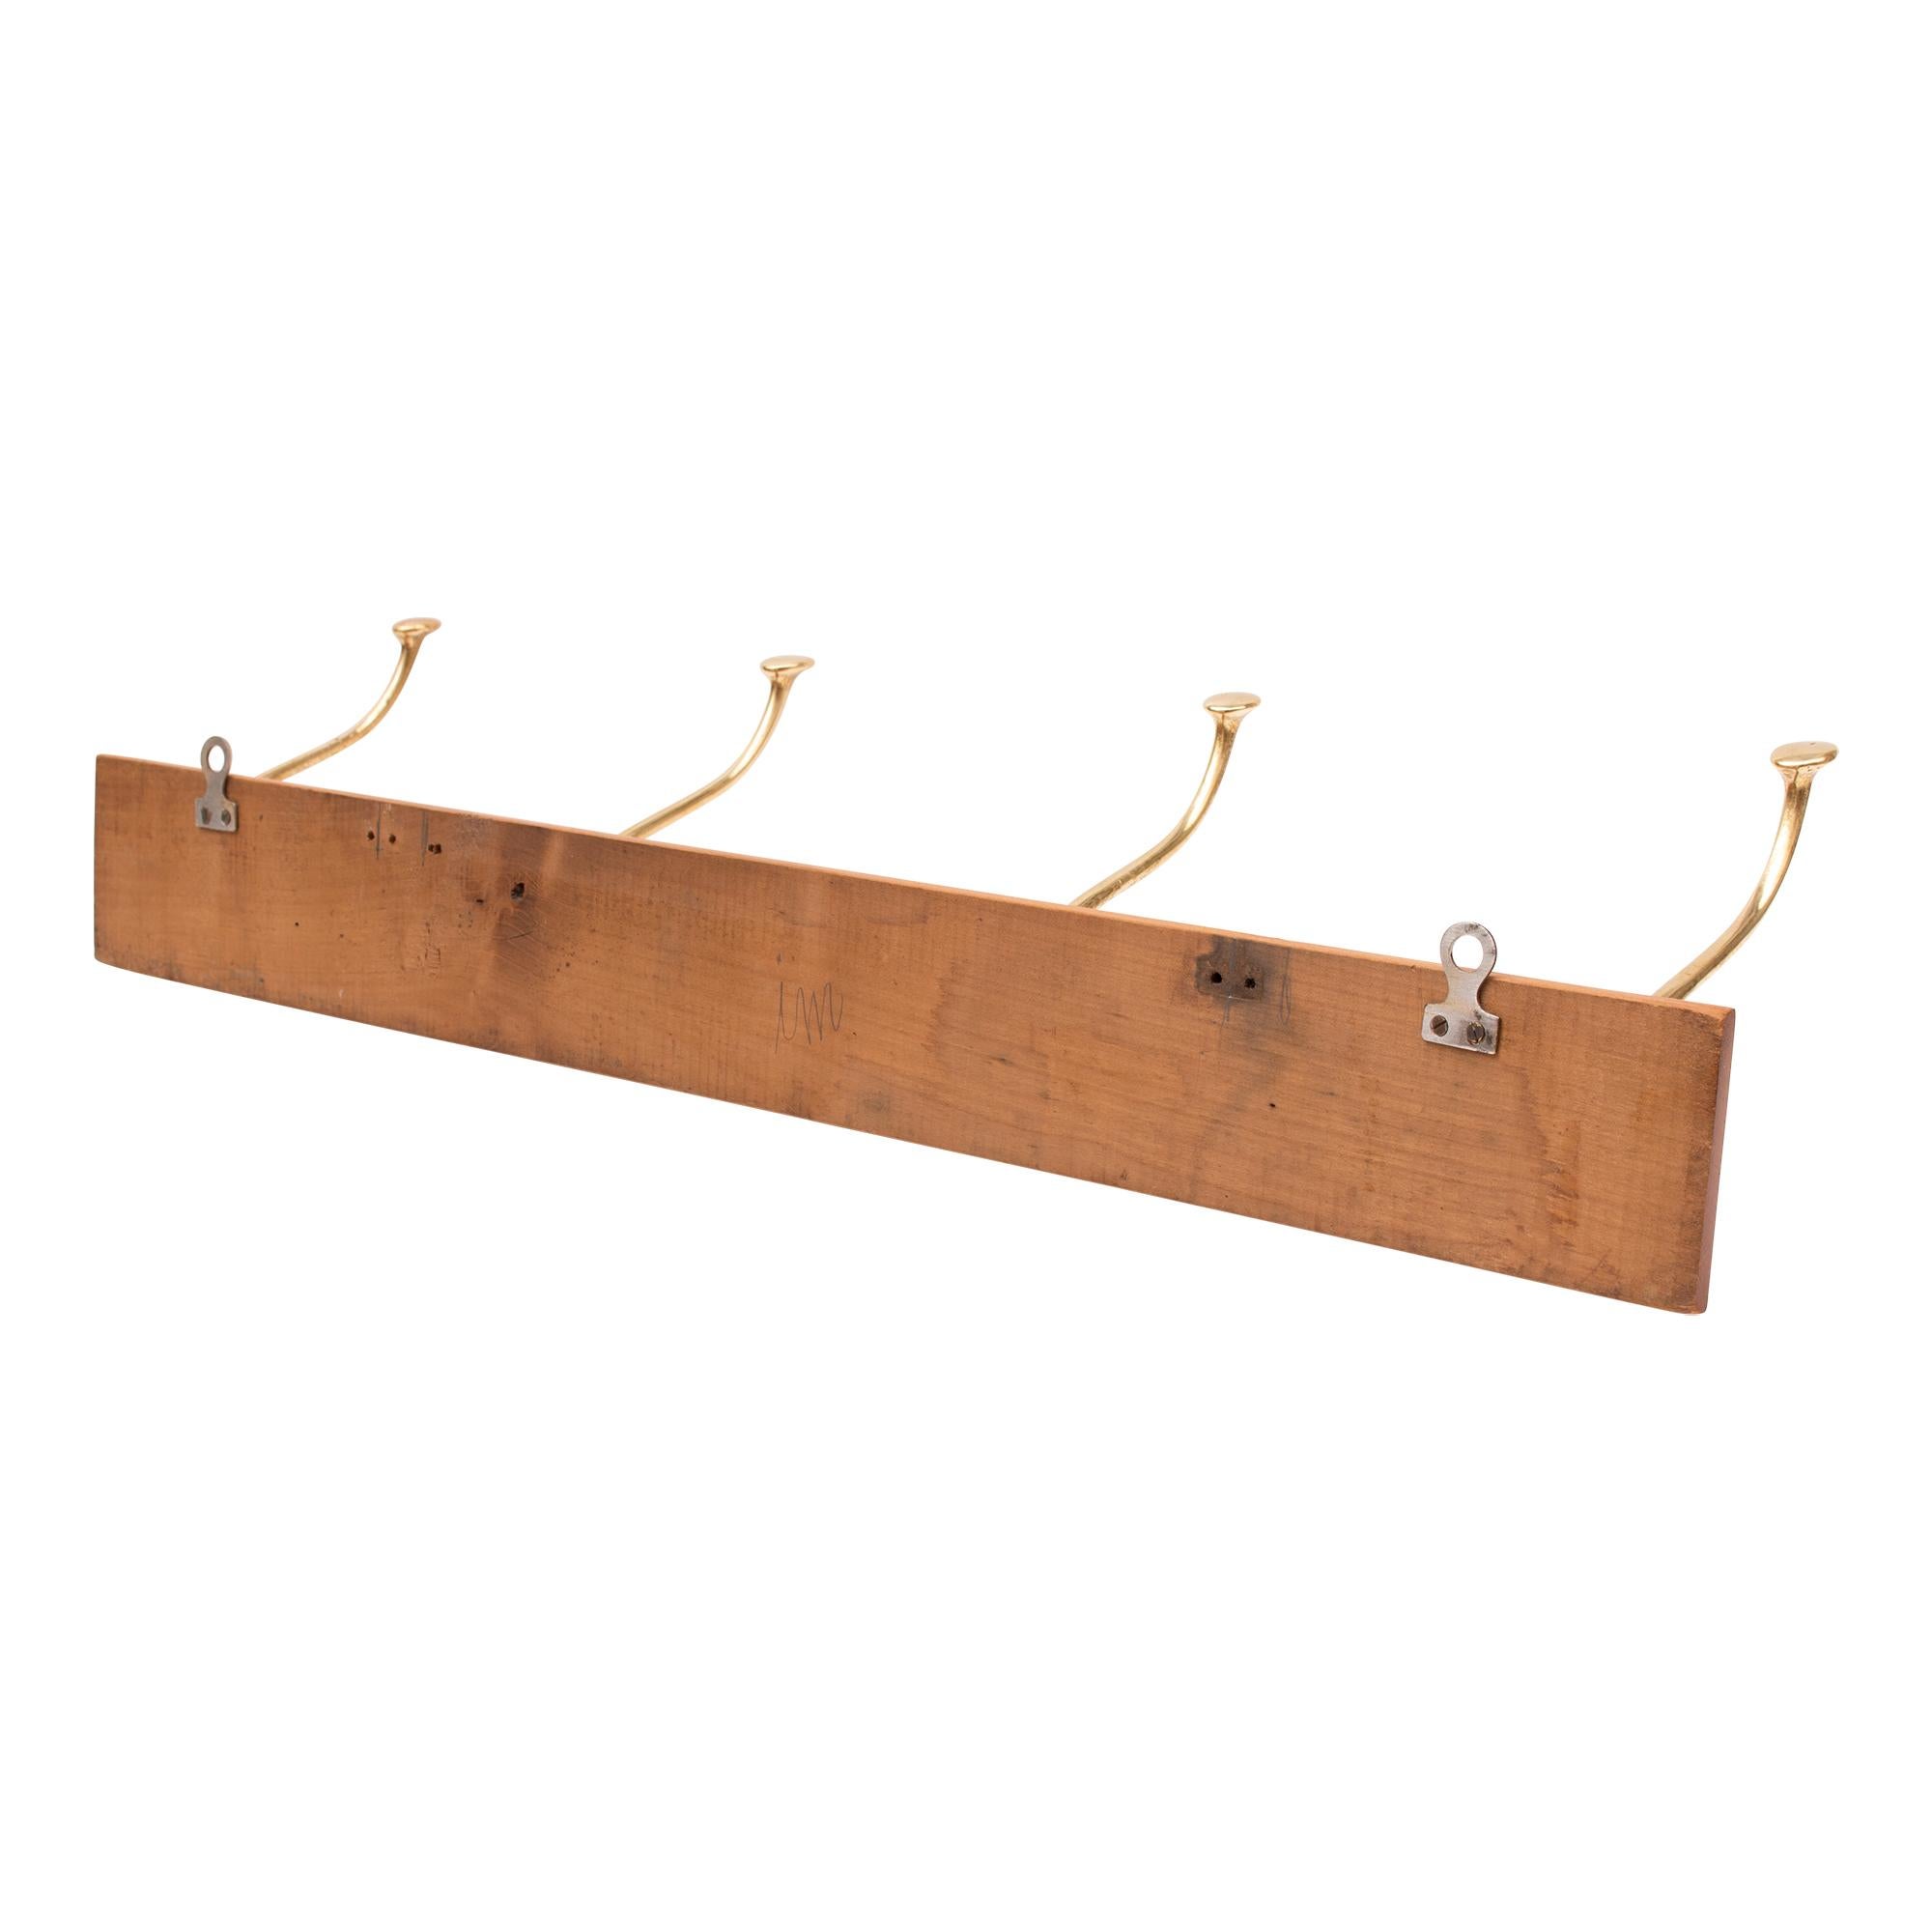 Beautiful small Art Nouveau coat rail made of cherrywood with four hooks made of solid brass.
The hooks are reminiscent of Adolf Loos' designs for the Cafe Capua in Vienna.